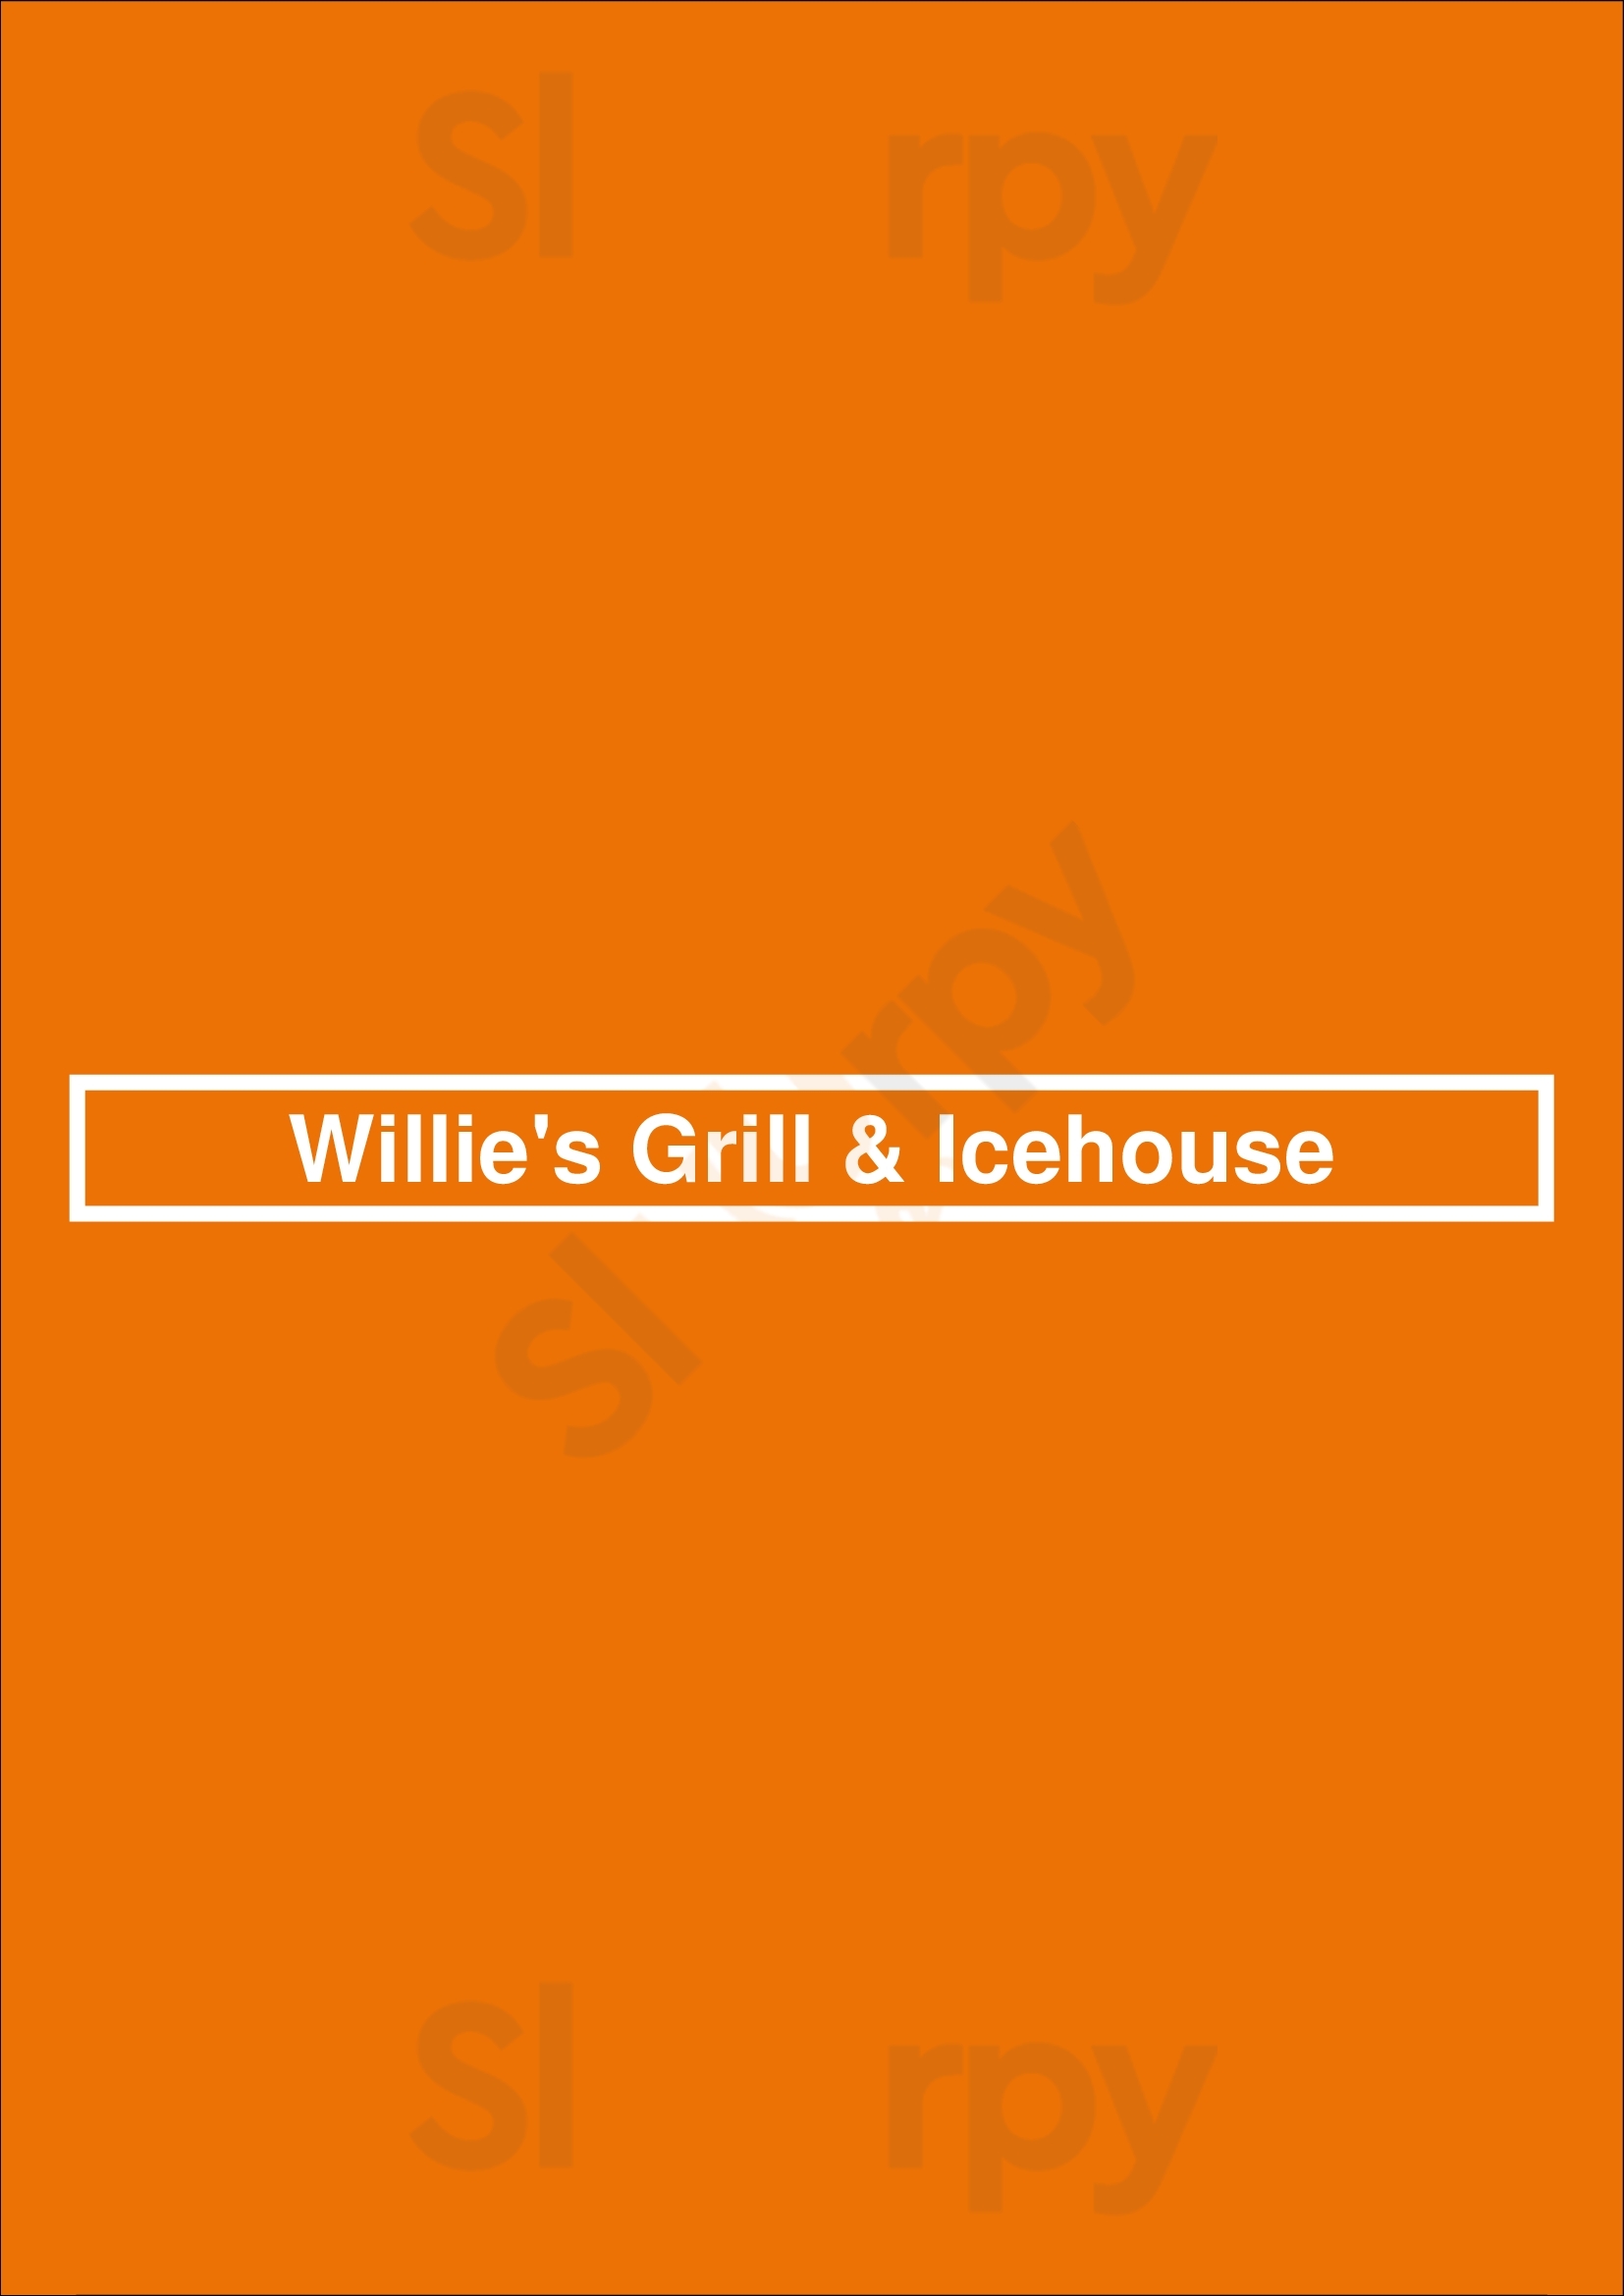 Willie's Grill & Icehouse Houston Menu - 1